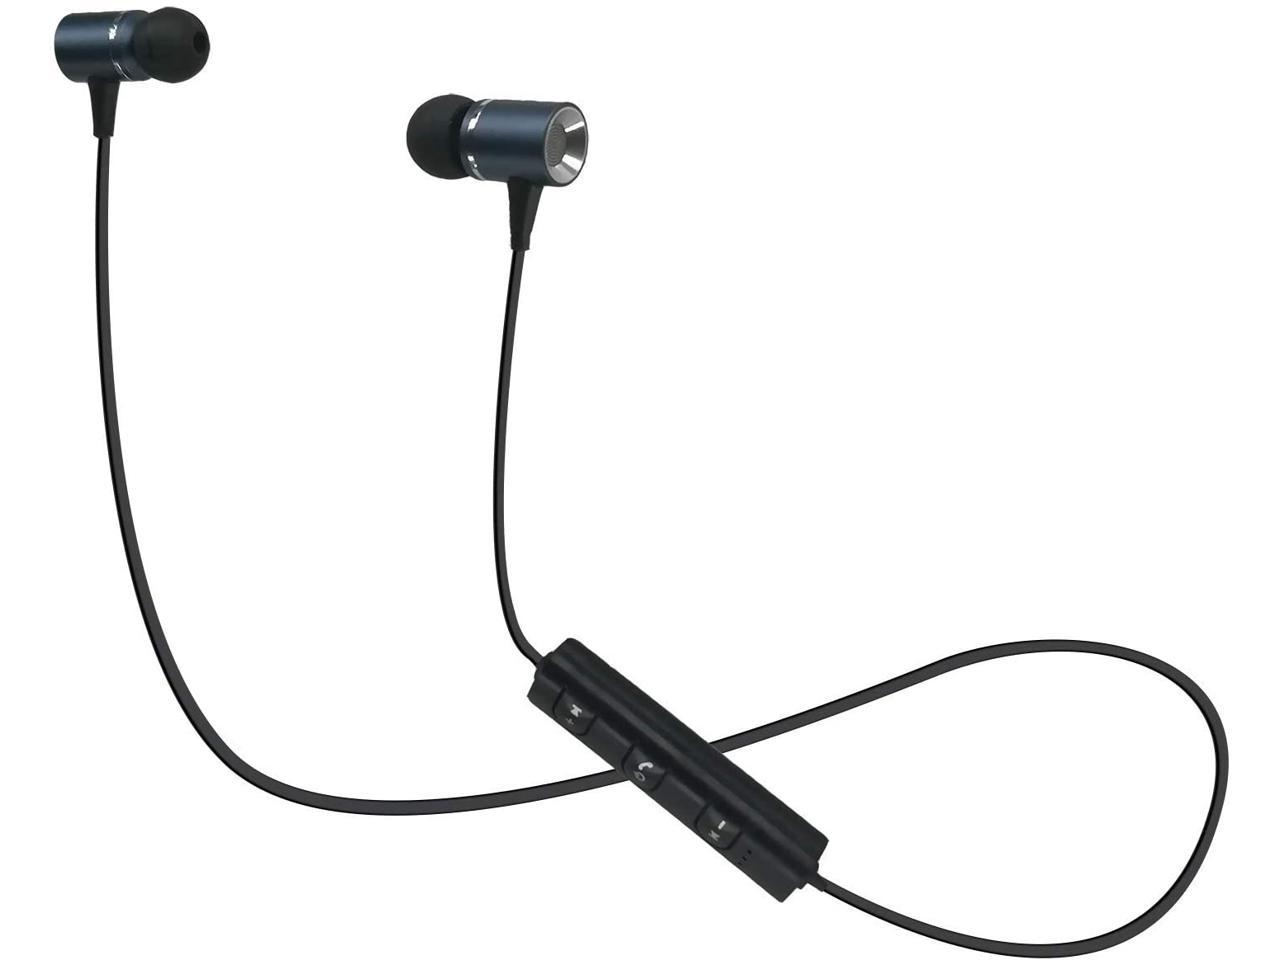 USB Charge Cable Included On-Board Microphone Waterproof in-Ear Earbuds Red Altec Lansing MZW101-BLK Bluetooth Earphones 33-Ft Wireless Range Boasting Up to 6 Hours of Battery Life 